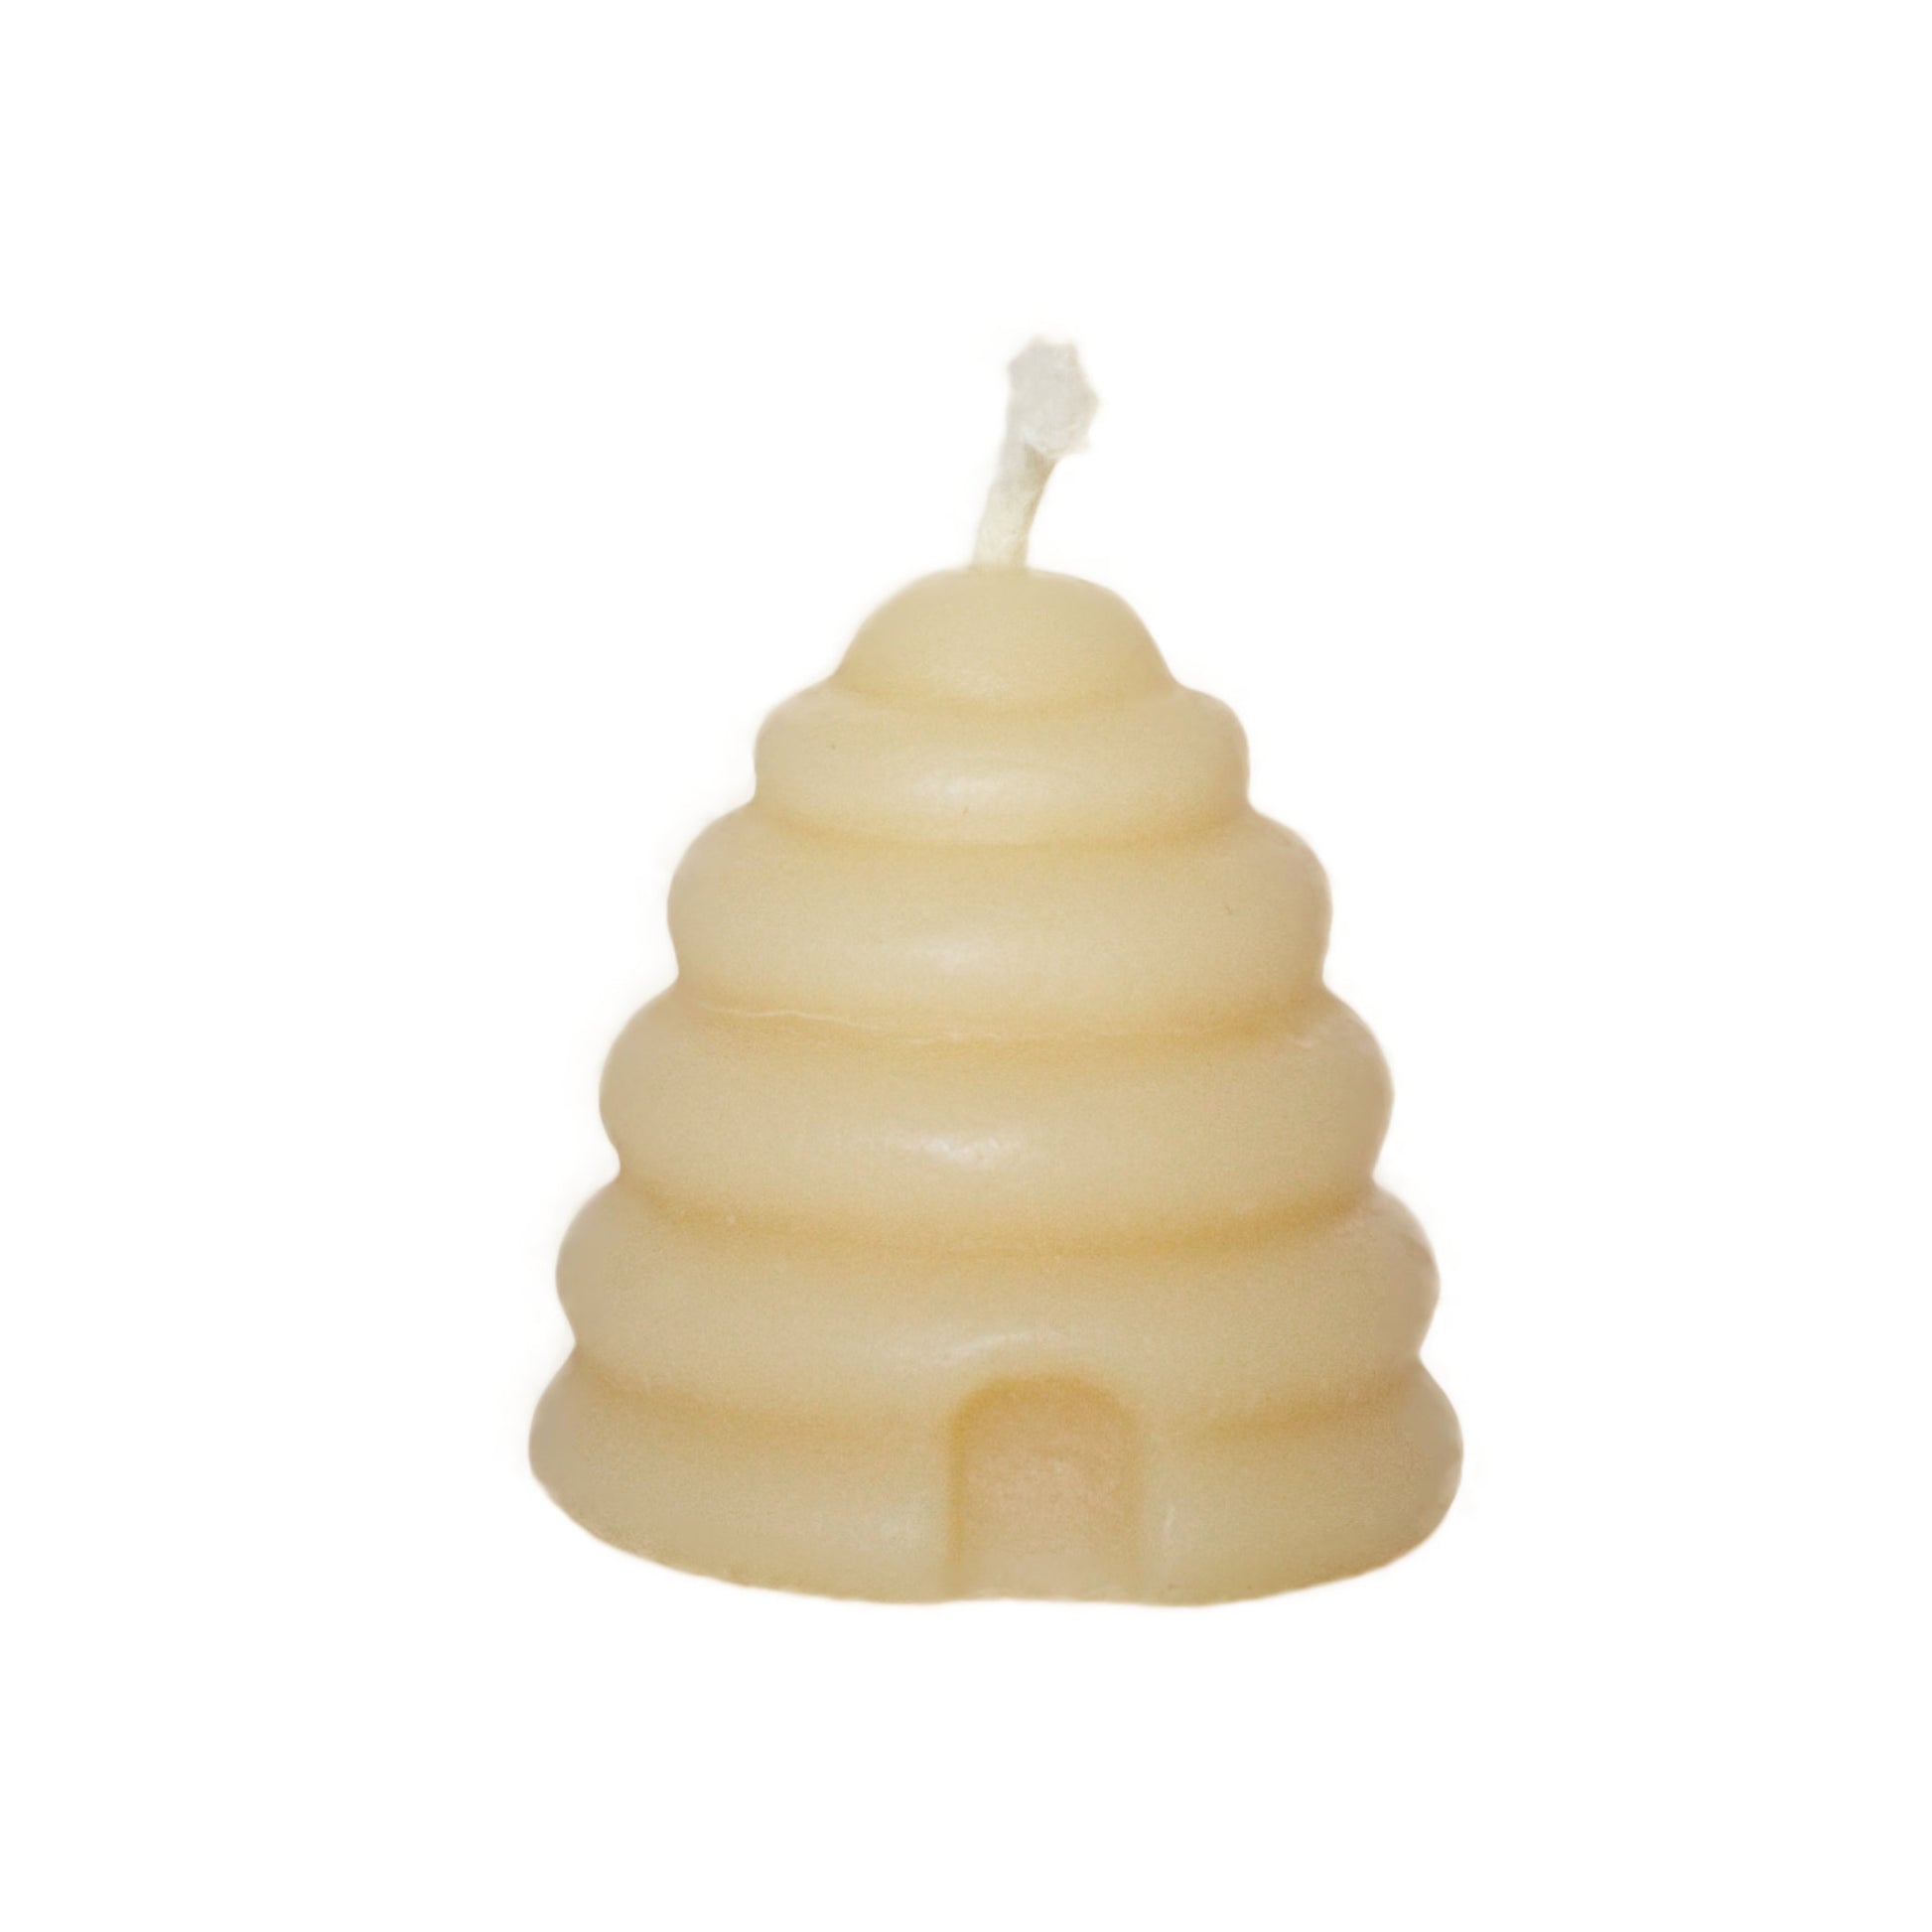 Beeswax candle skep ornamental